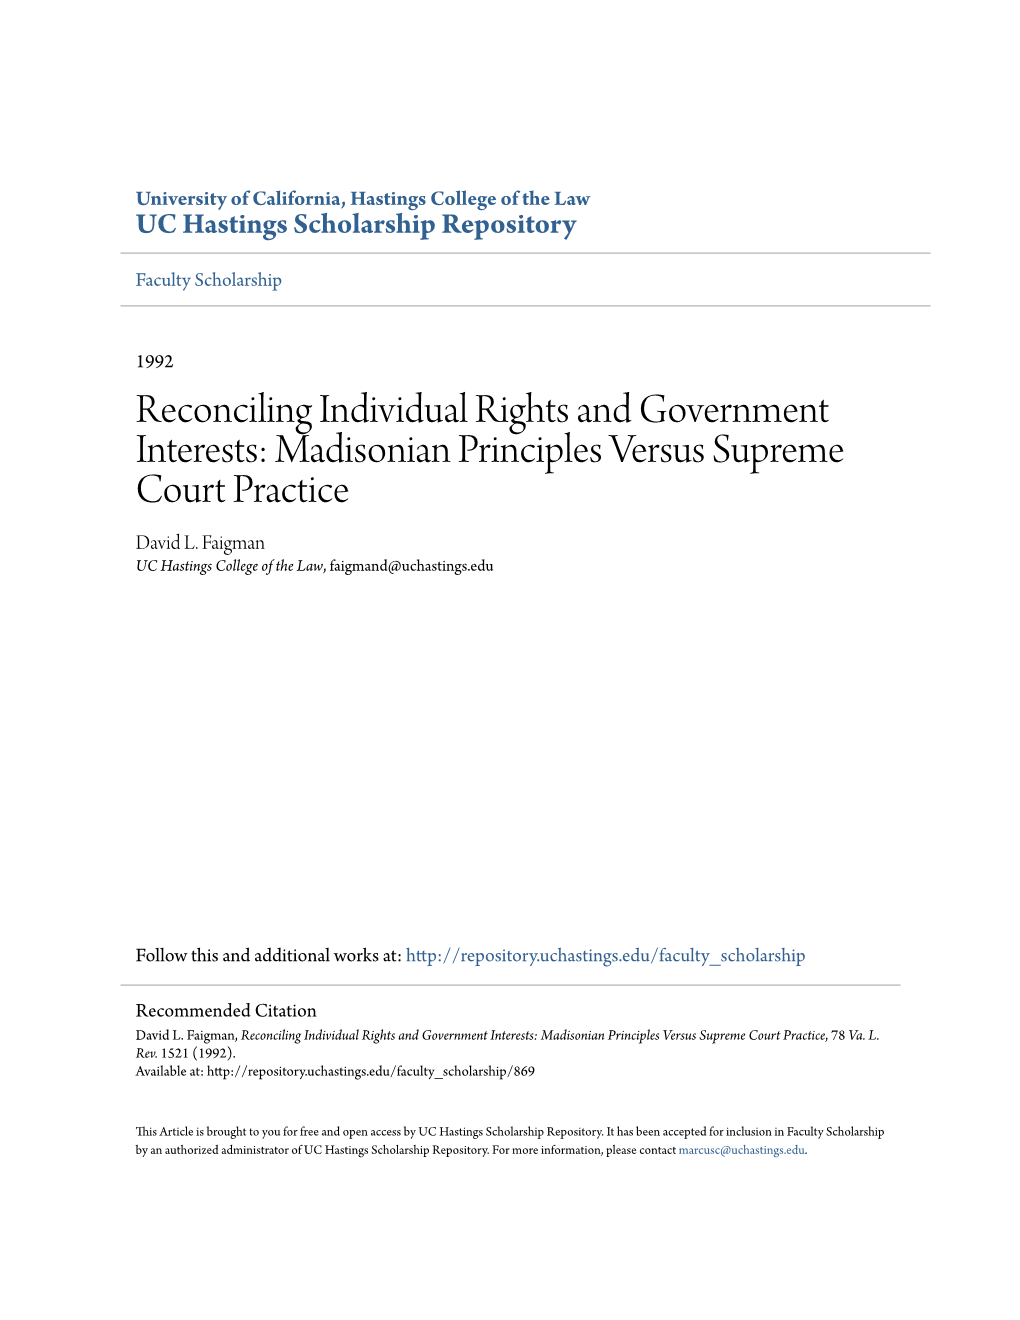 Reconciling Individual Rights and Government Interests: Madisonian Principles Versus Supreme Court Practice David L